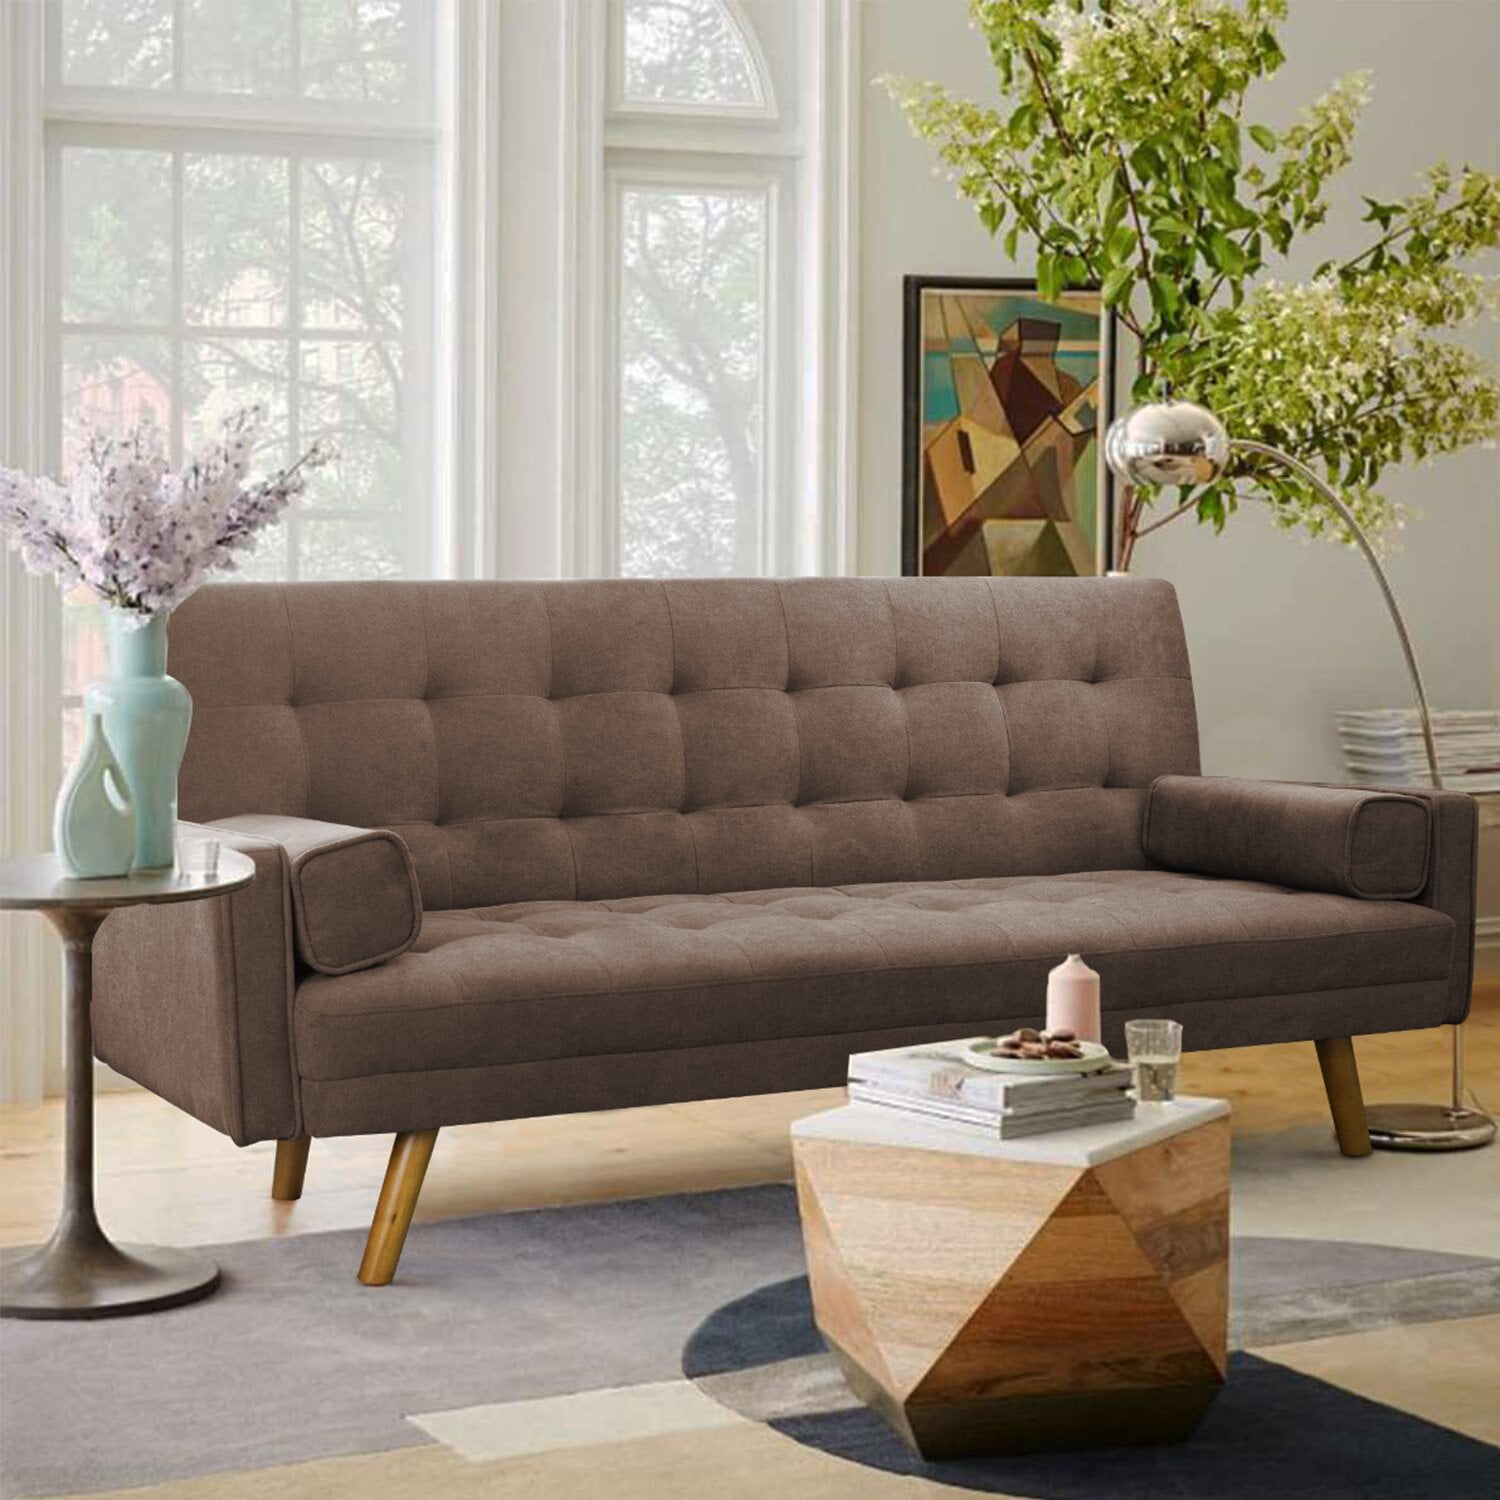 Zoologisk have kedel gele Lacoo Modern Linen Fabric Futon Sofa Bed Split Back with Pillows, 76" Brown  - Walmart.com